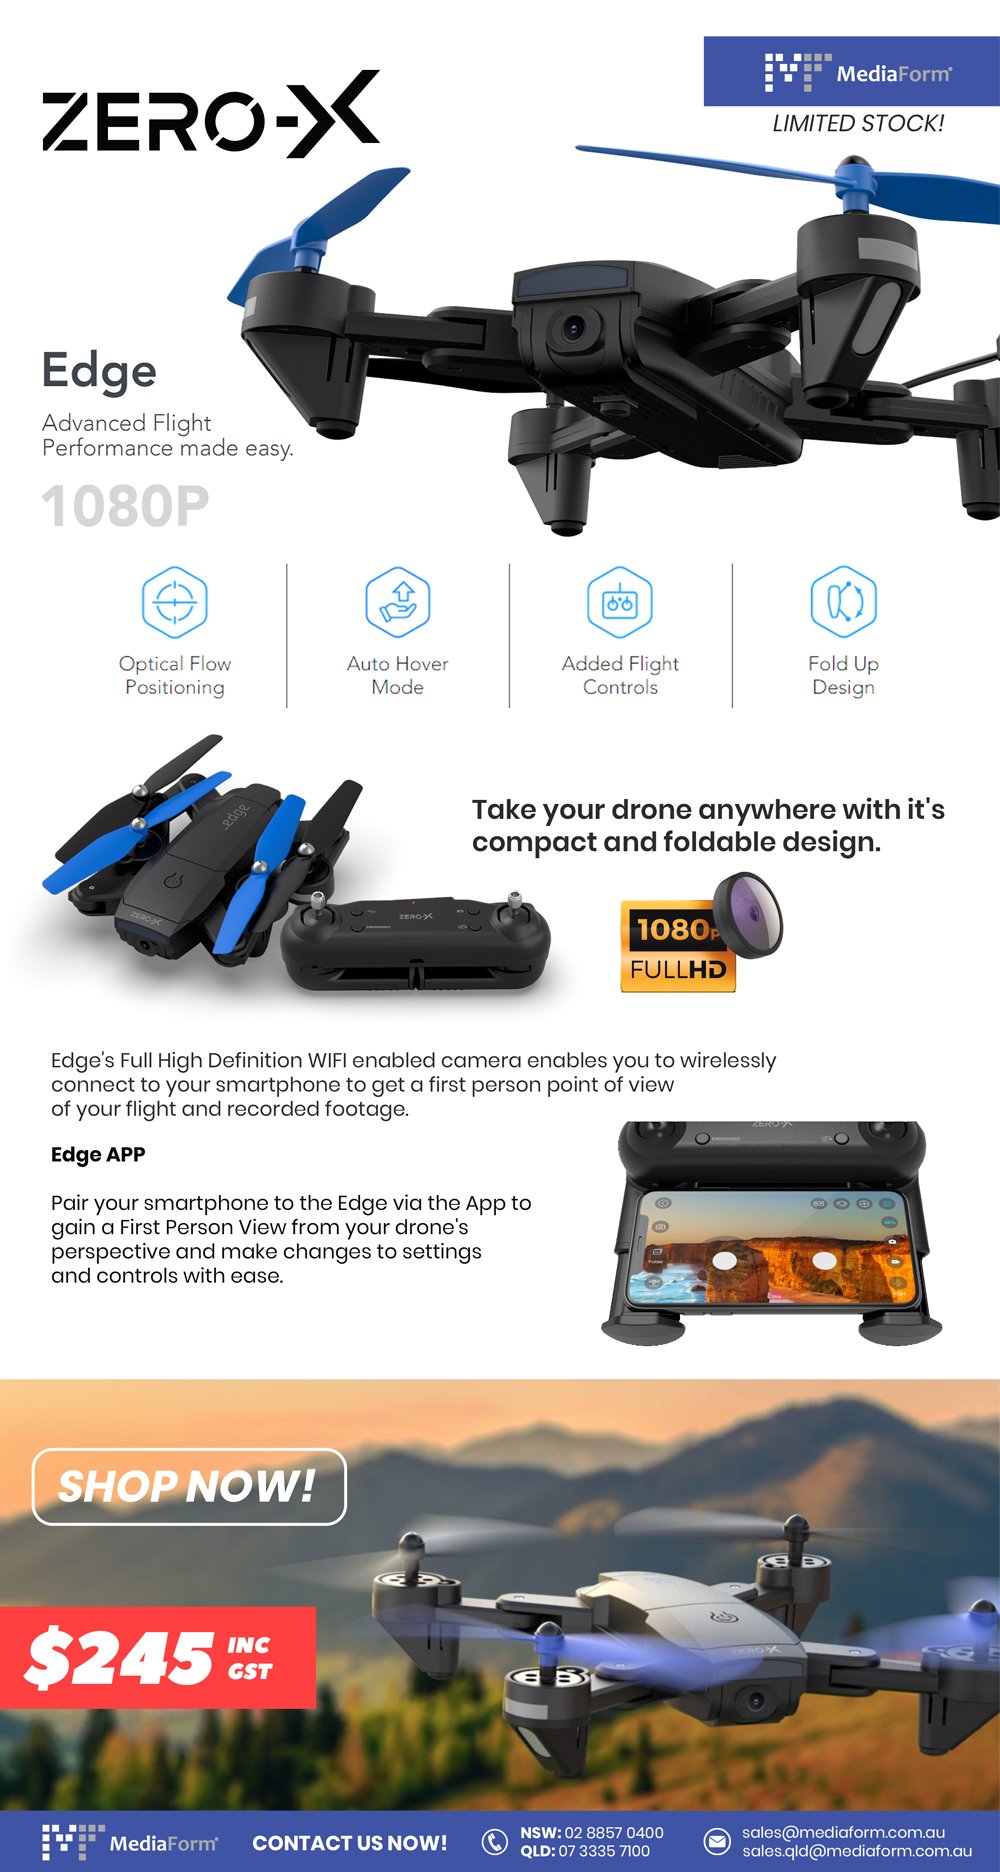 Mediaform Computer Supplies Zero X Edge Full Hd Drone Now In Stock Milled